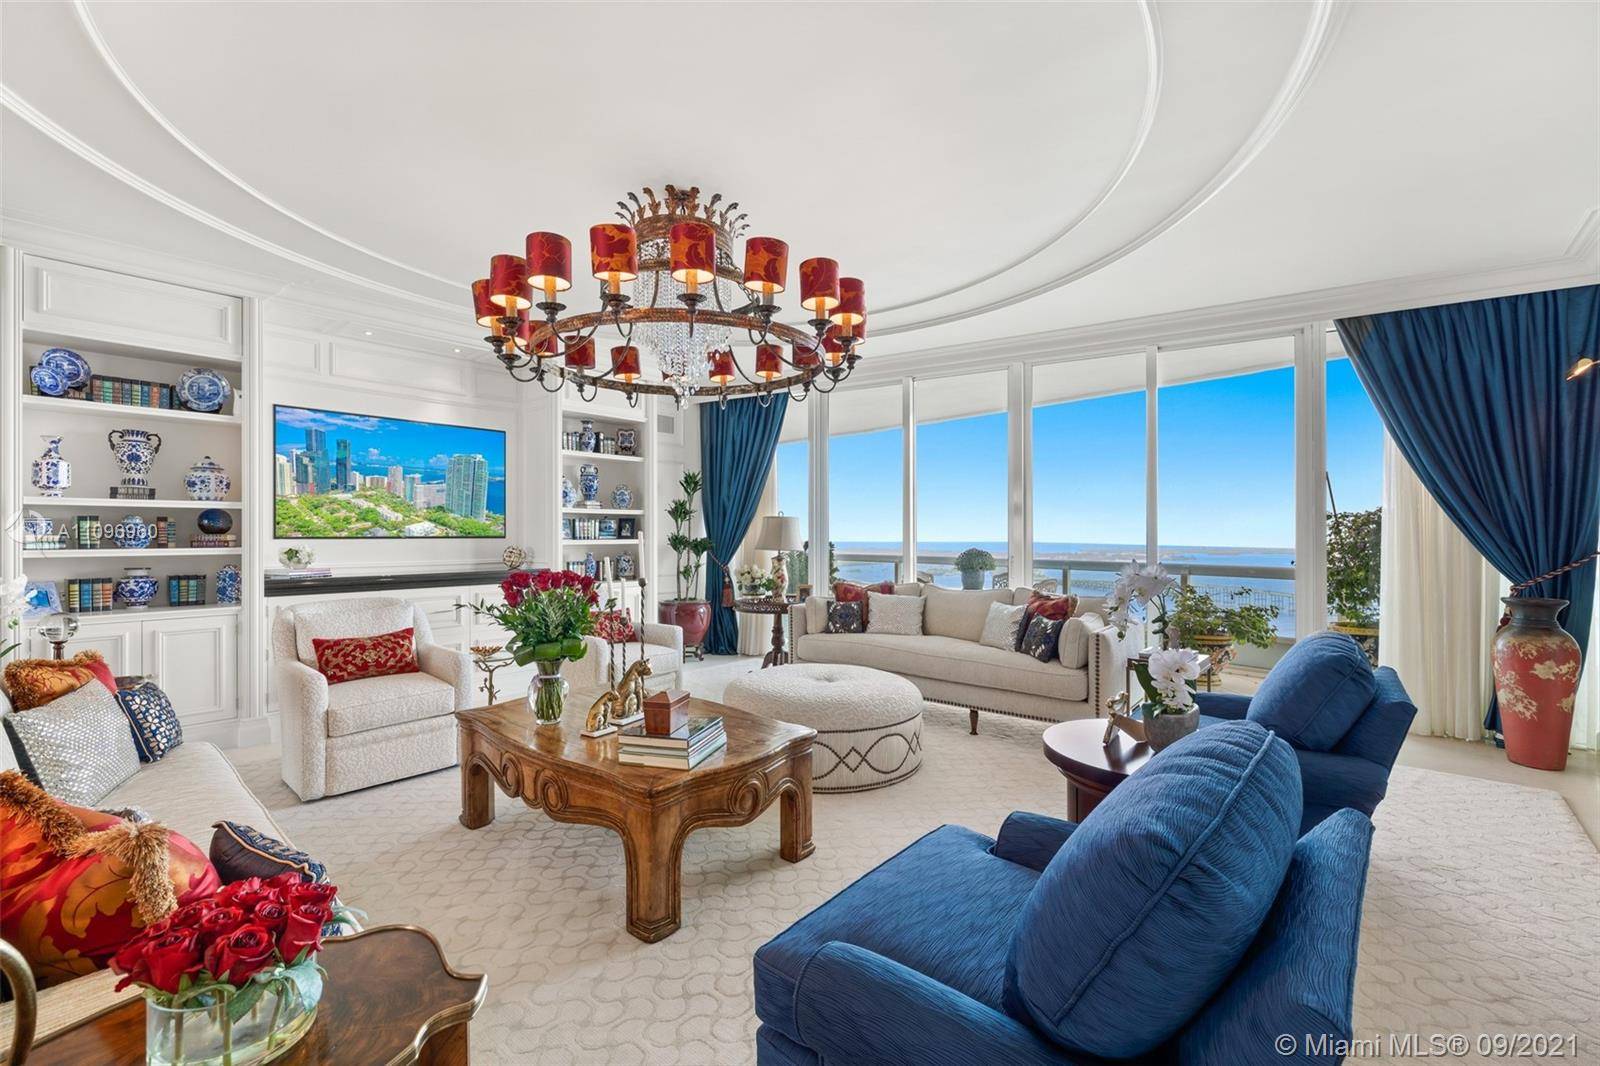 The best flow thru plan in Santa Maria, residence 4205, sits on the 42nd floor with drop dead gorgeous views spanning from the bay to the city.